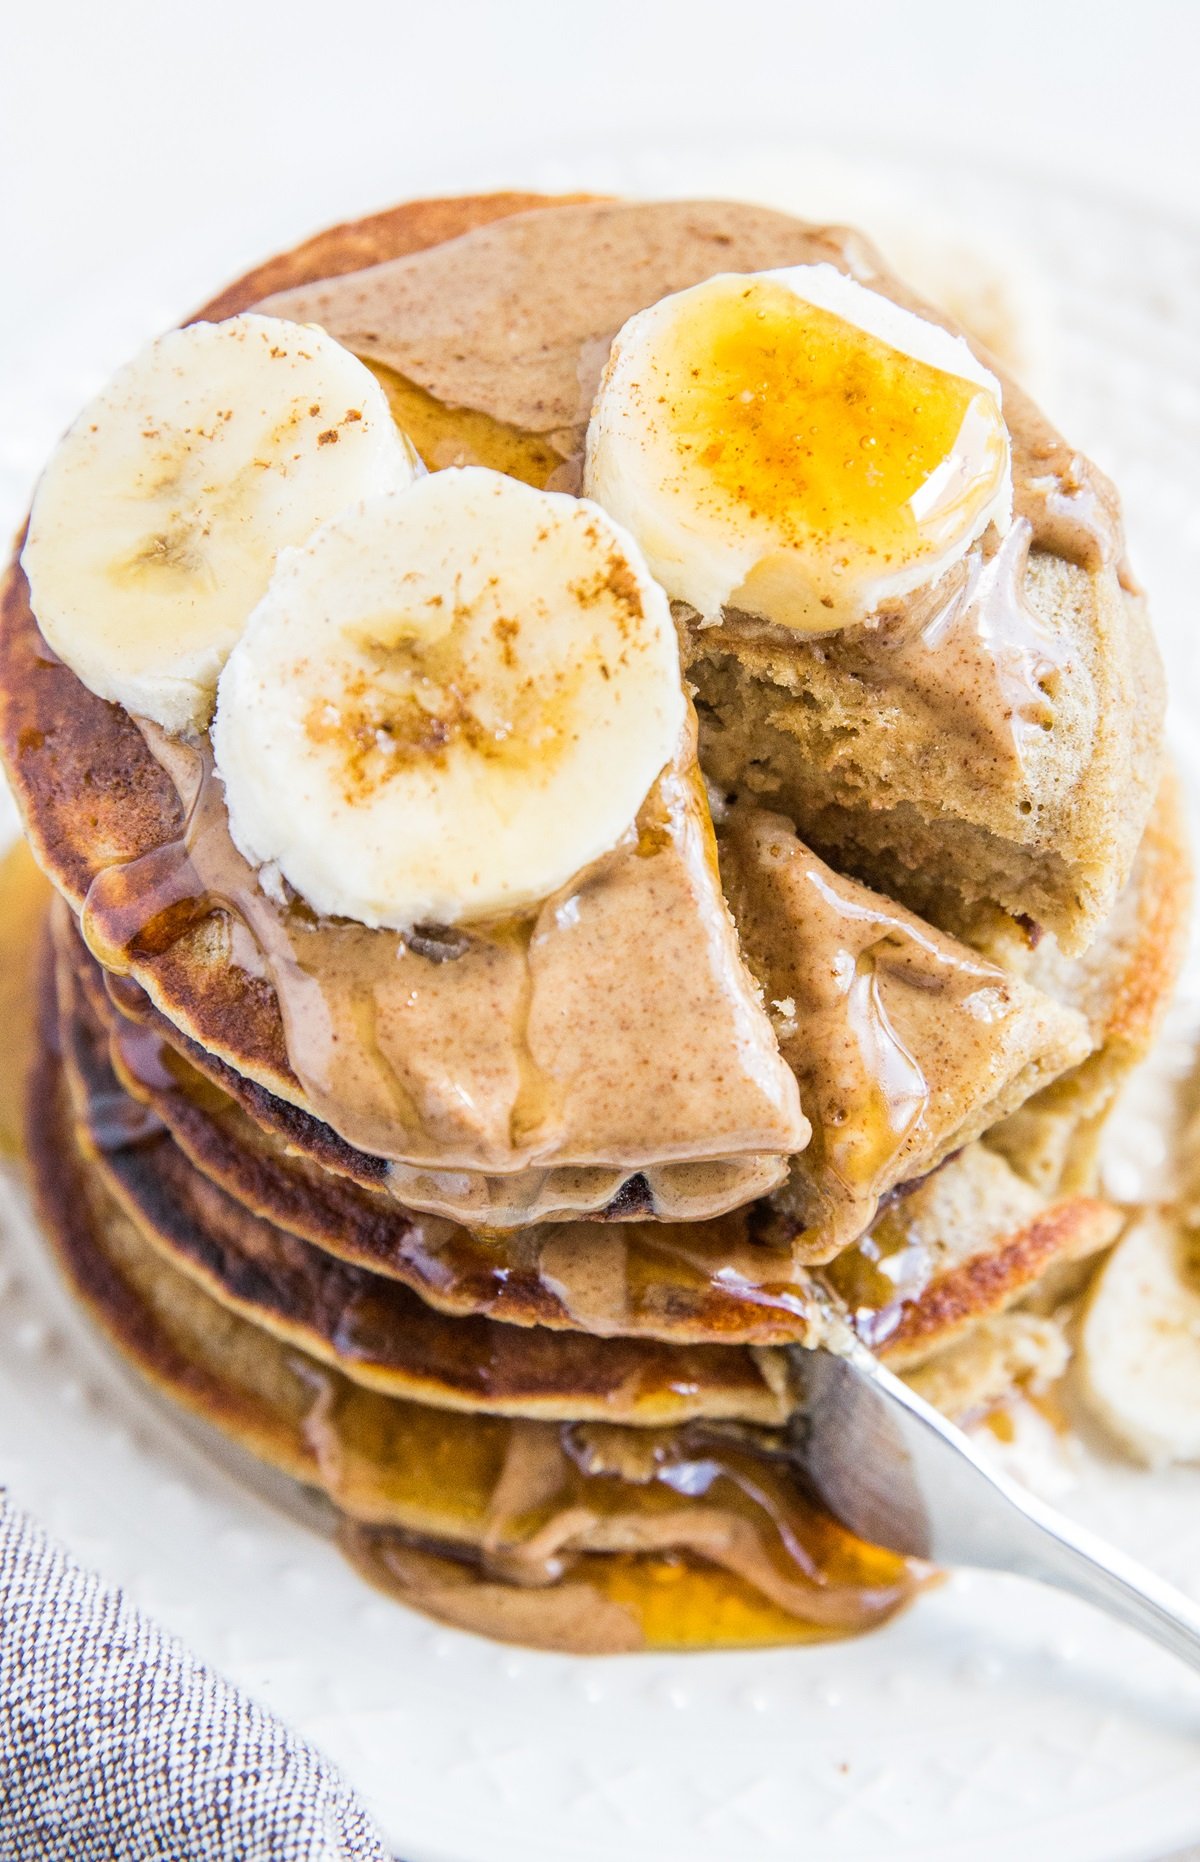 Flourless Oatmeal Banana Pancakes made with quick oats. Dairy-free and gluten-free pancakes recipe